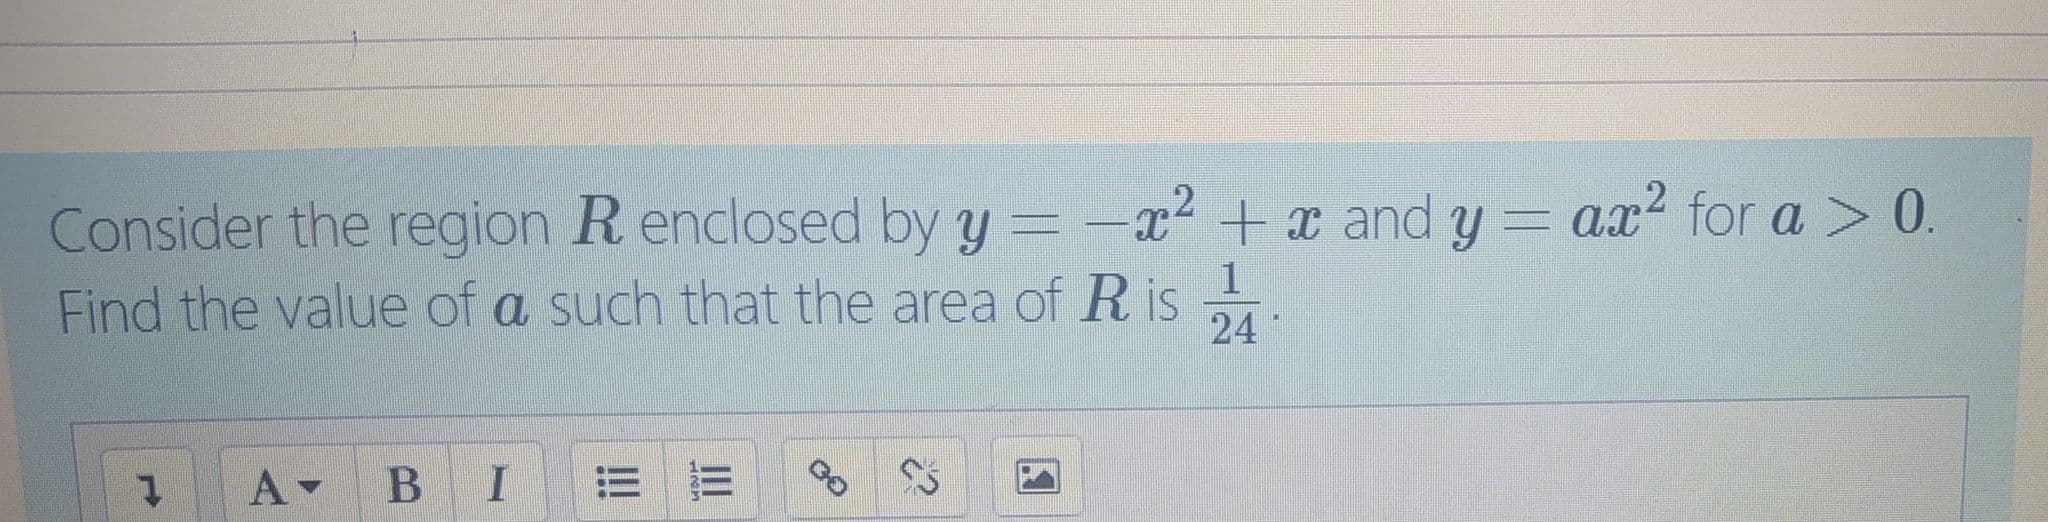 Consider the region R enclosed by y =-x2 +x and y = ax? for a > 0.
Find the value of a such that the area of R is
1
24
